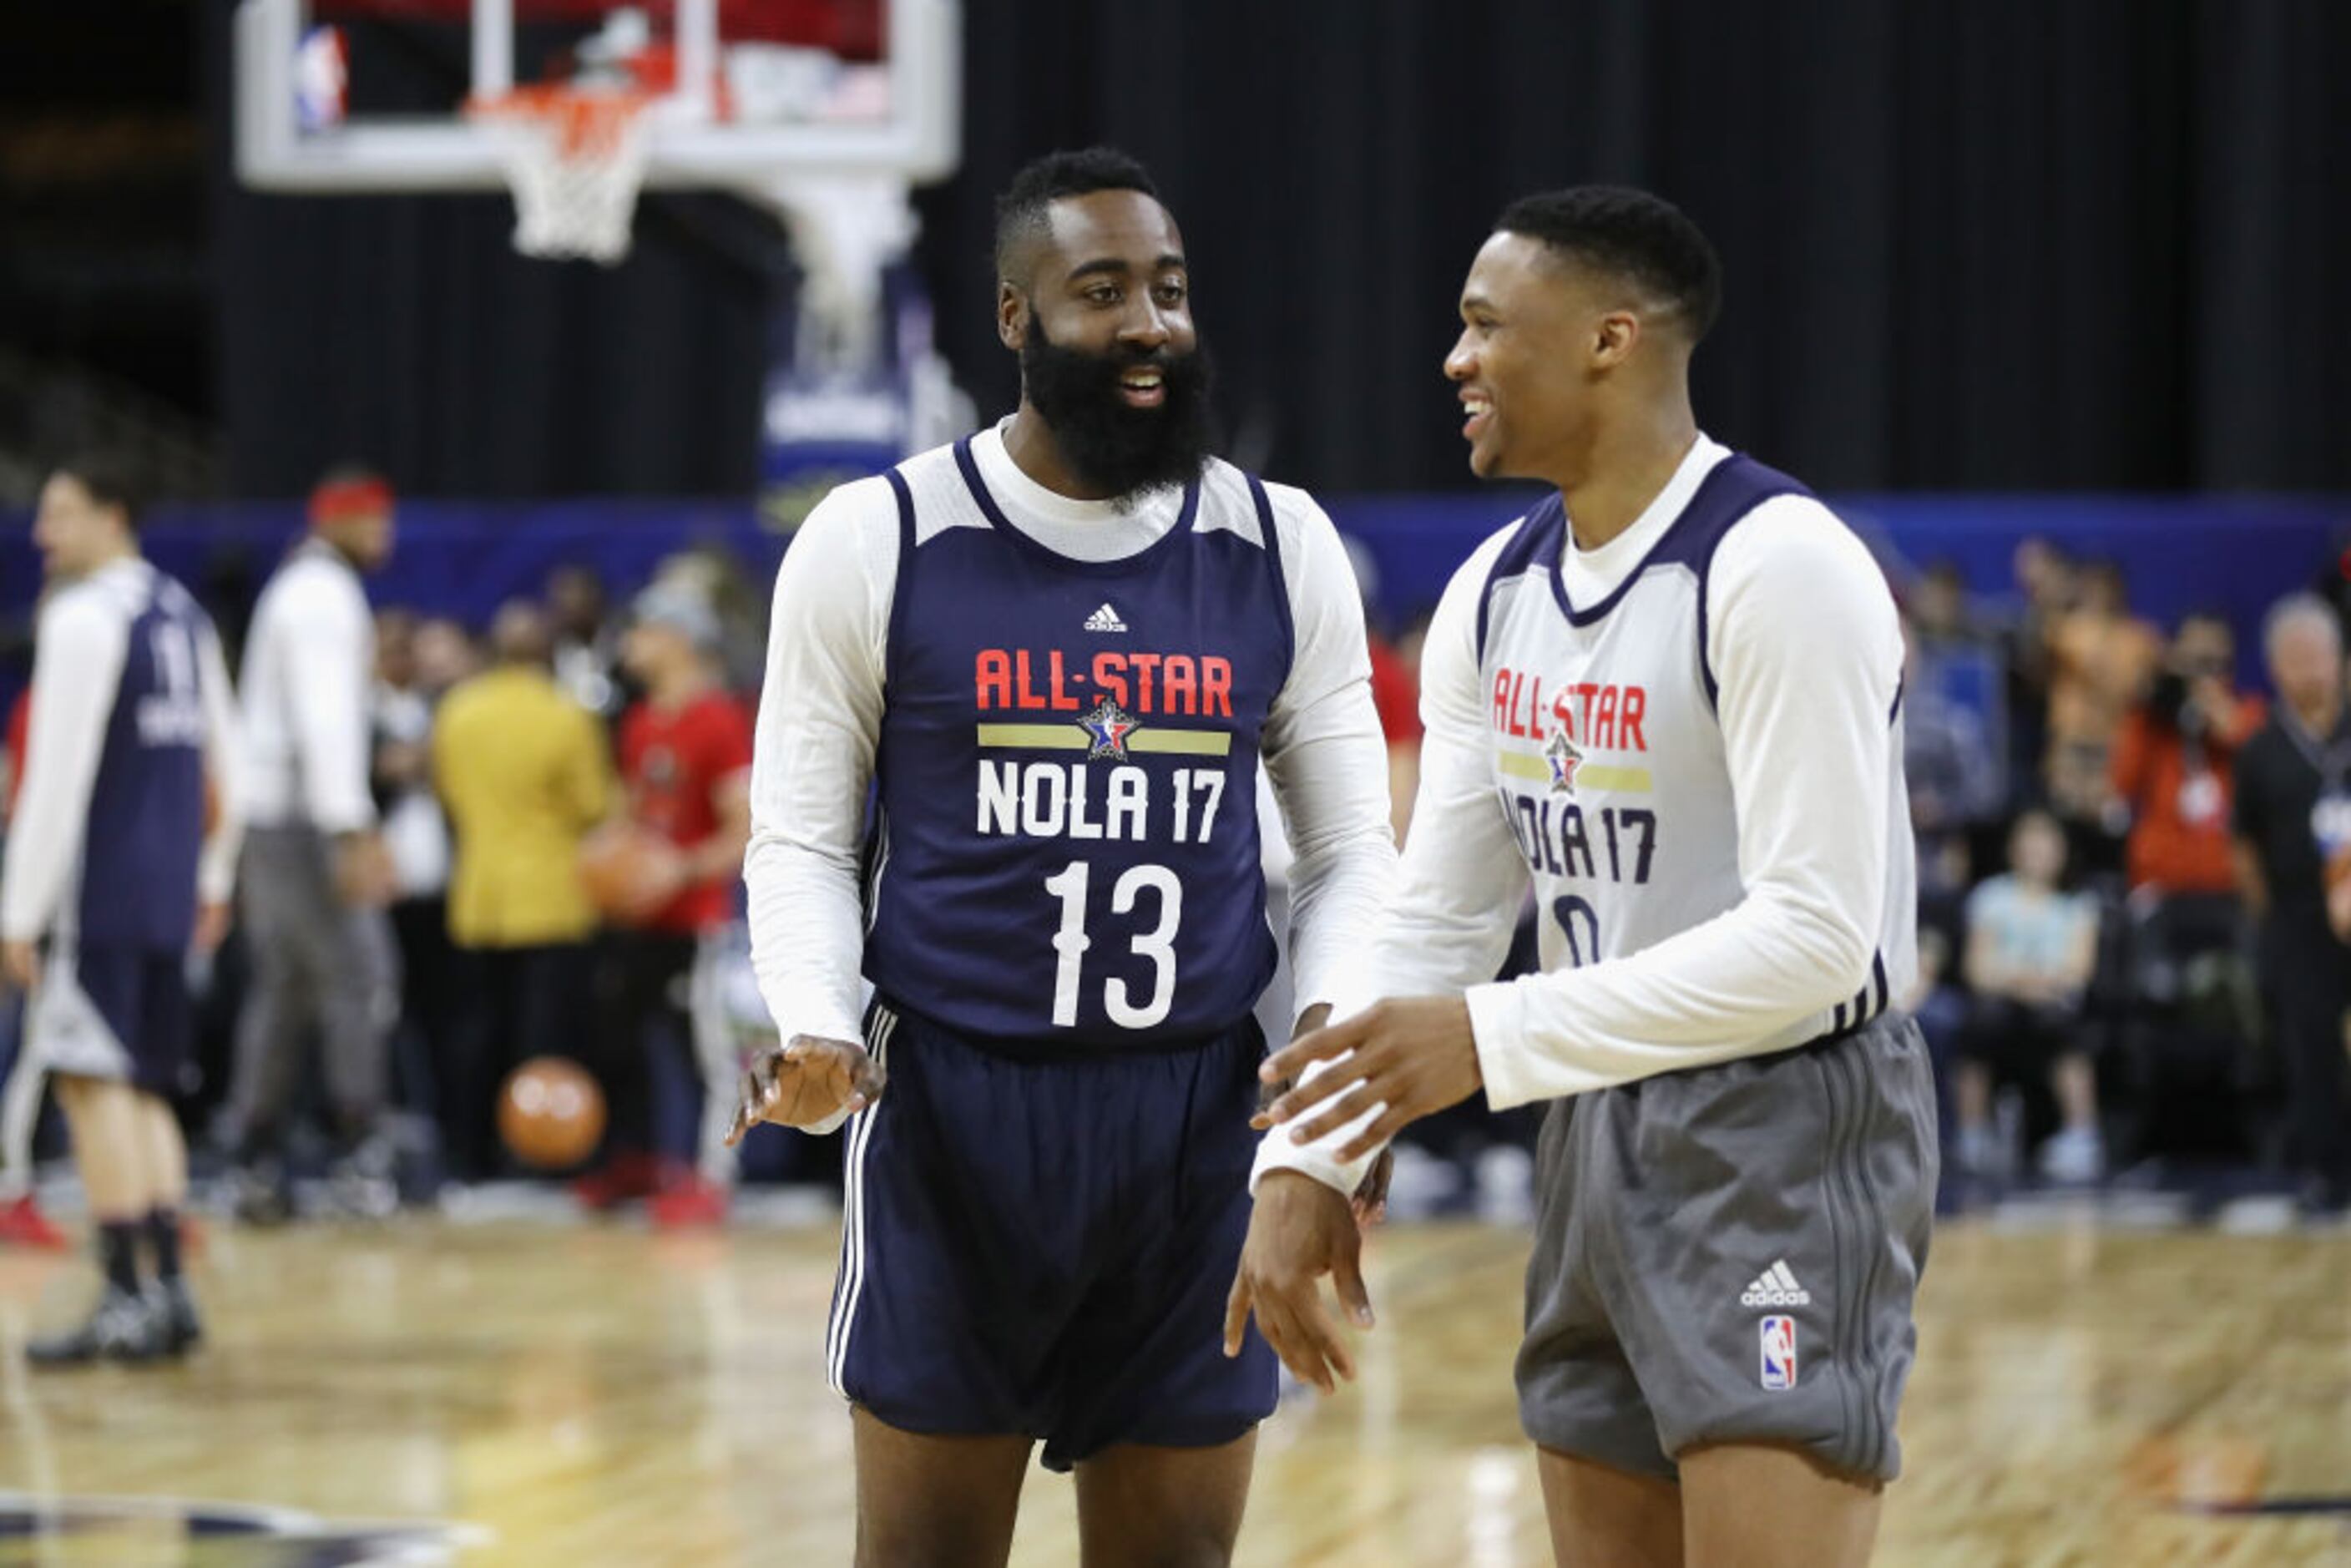 NBA: James Harden, Luka Doncic, Russell Westbrook and more show off their  festive fashion